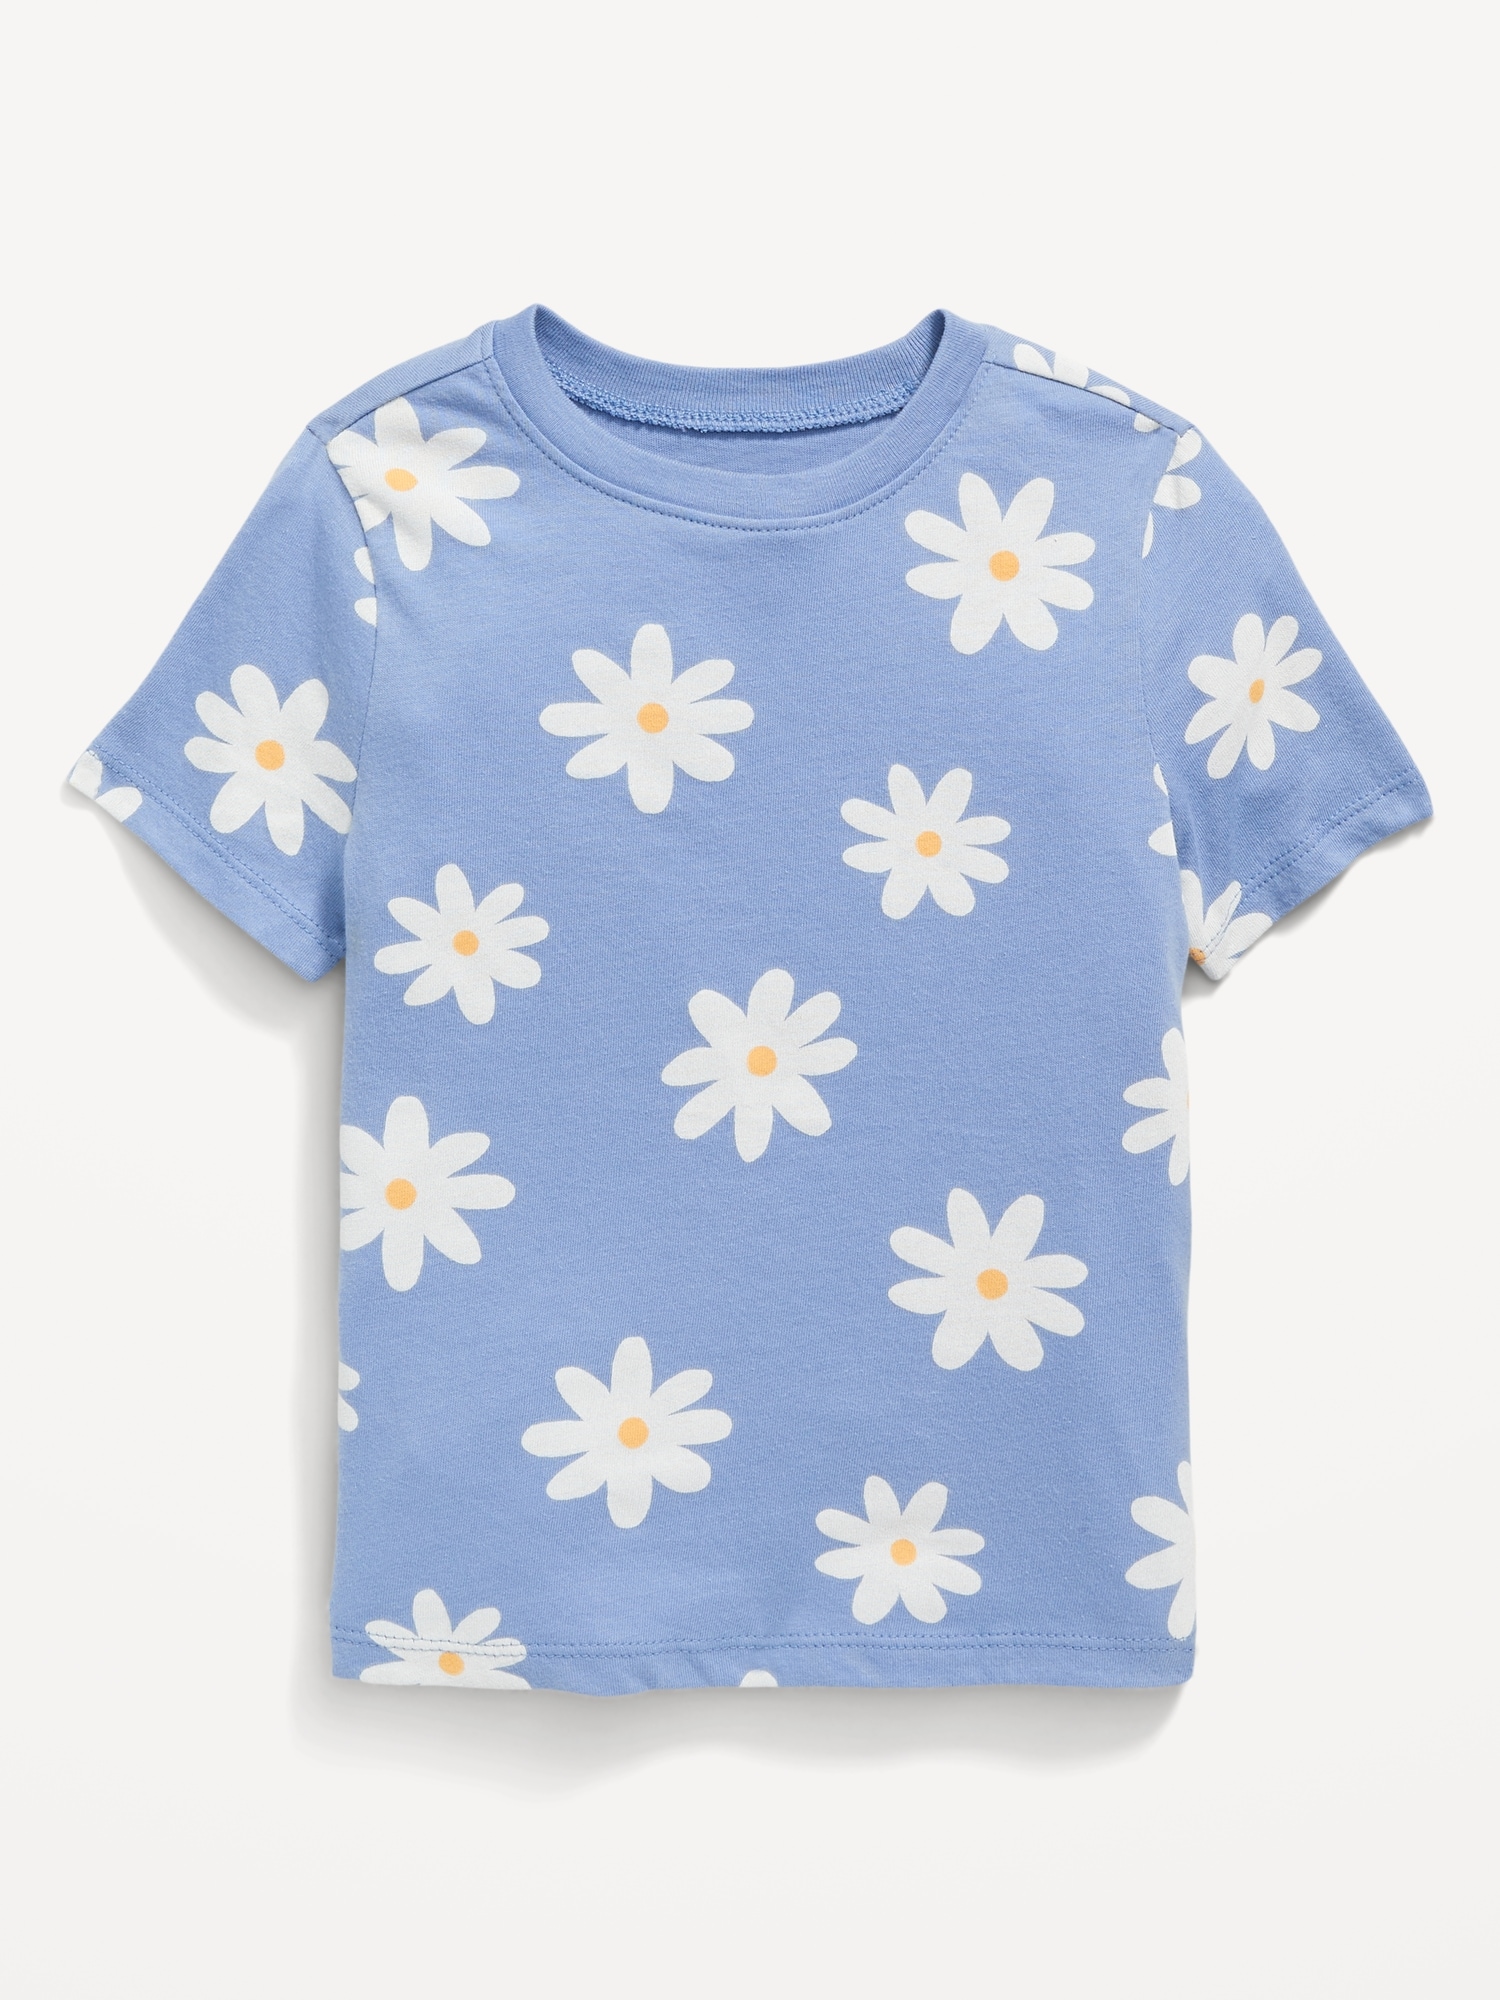 Unisex Printed Crew-Neck T-Shirt for Toddler